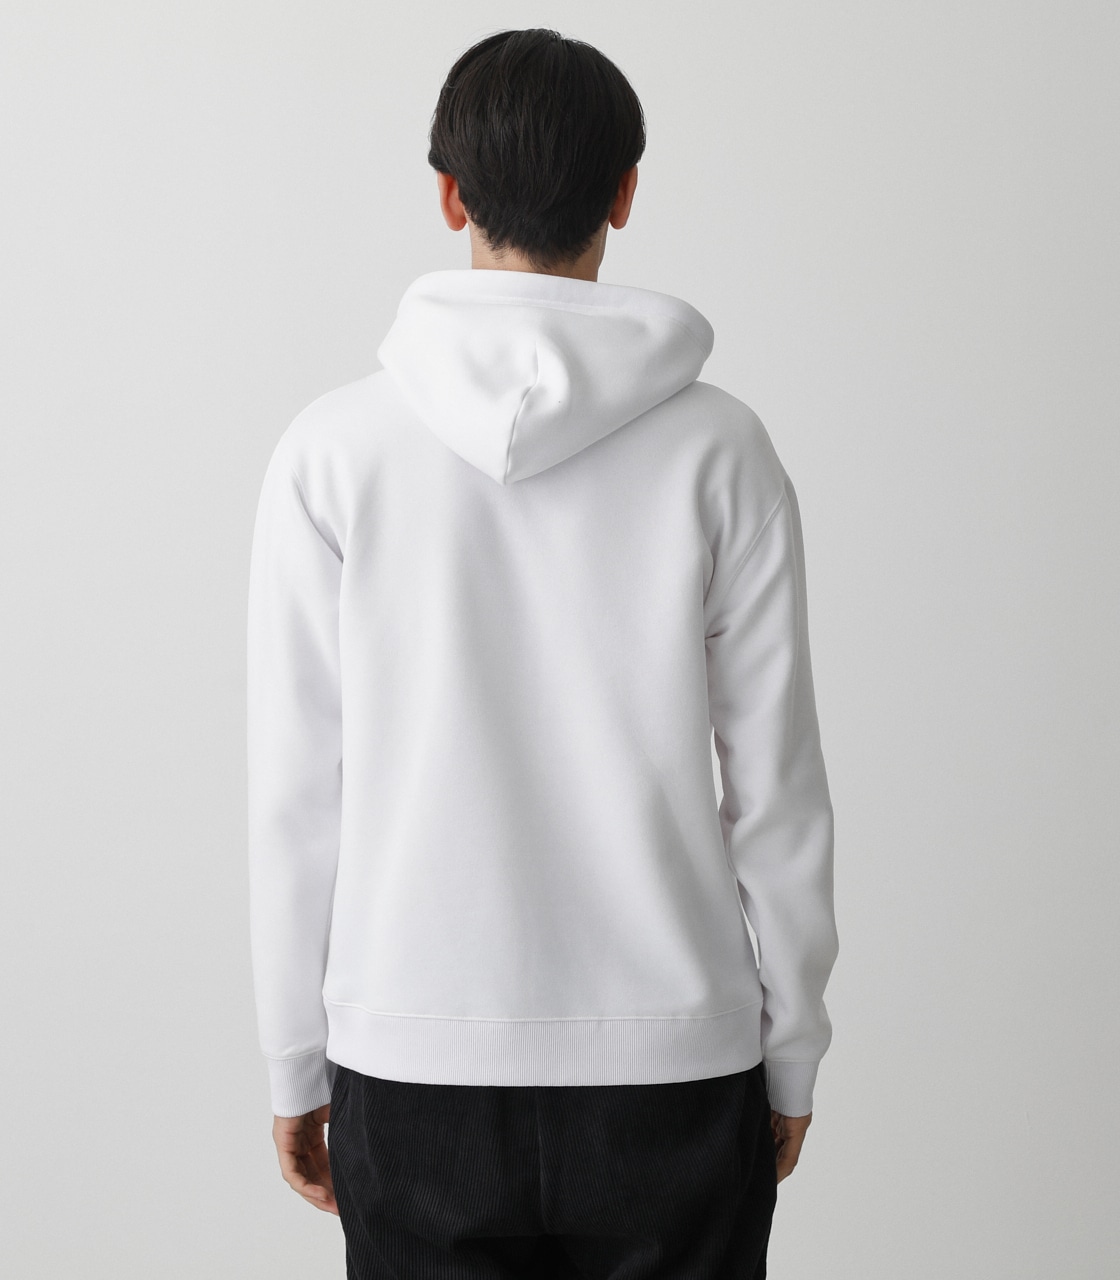 BRUSHED BACK COLOR HOODIE/ブラッシュドバックカラーフーディ 詳細画像 WHT 7